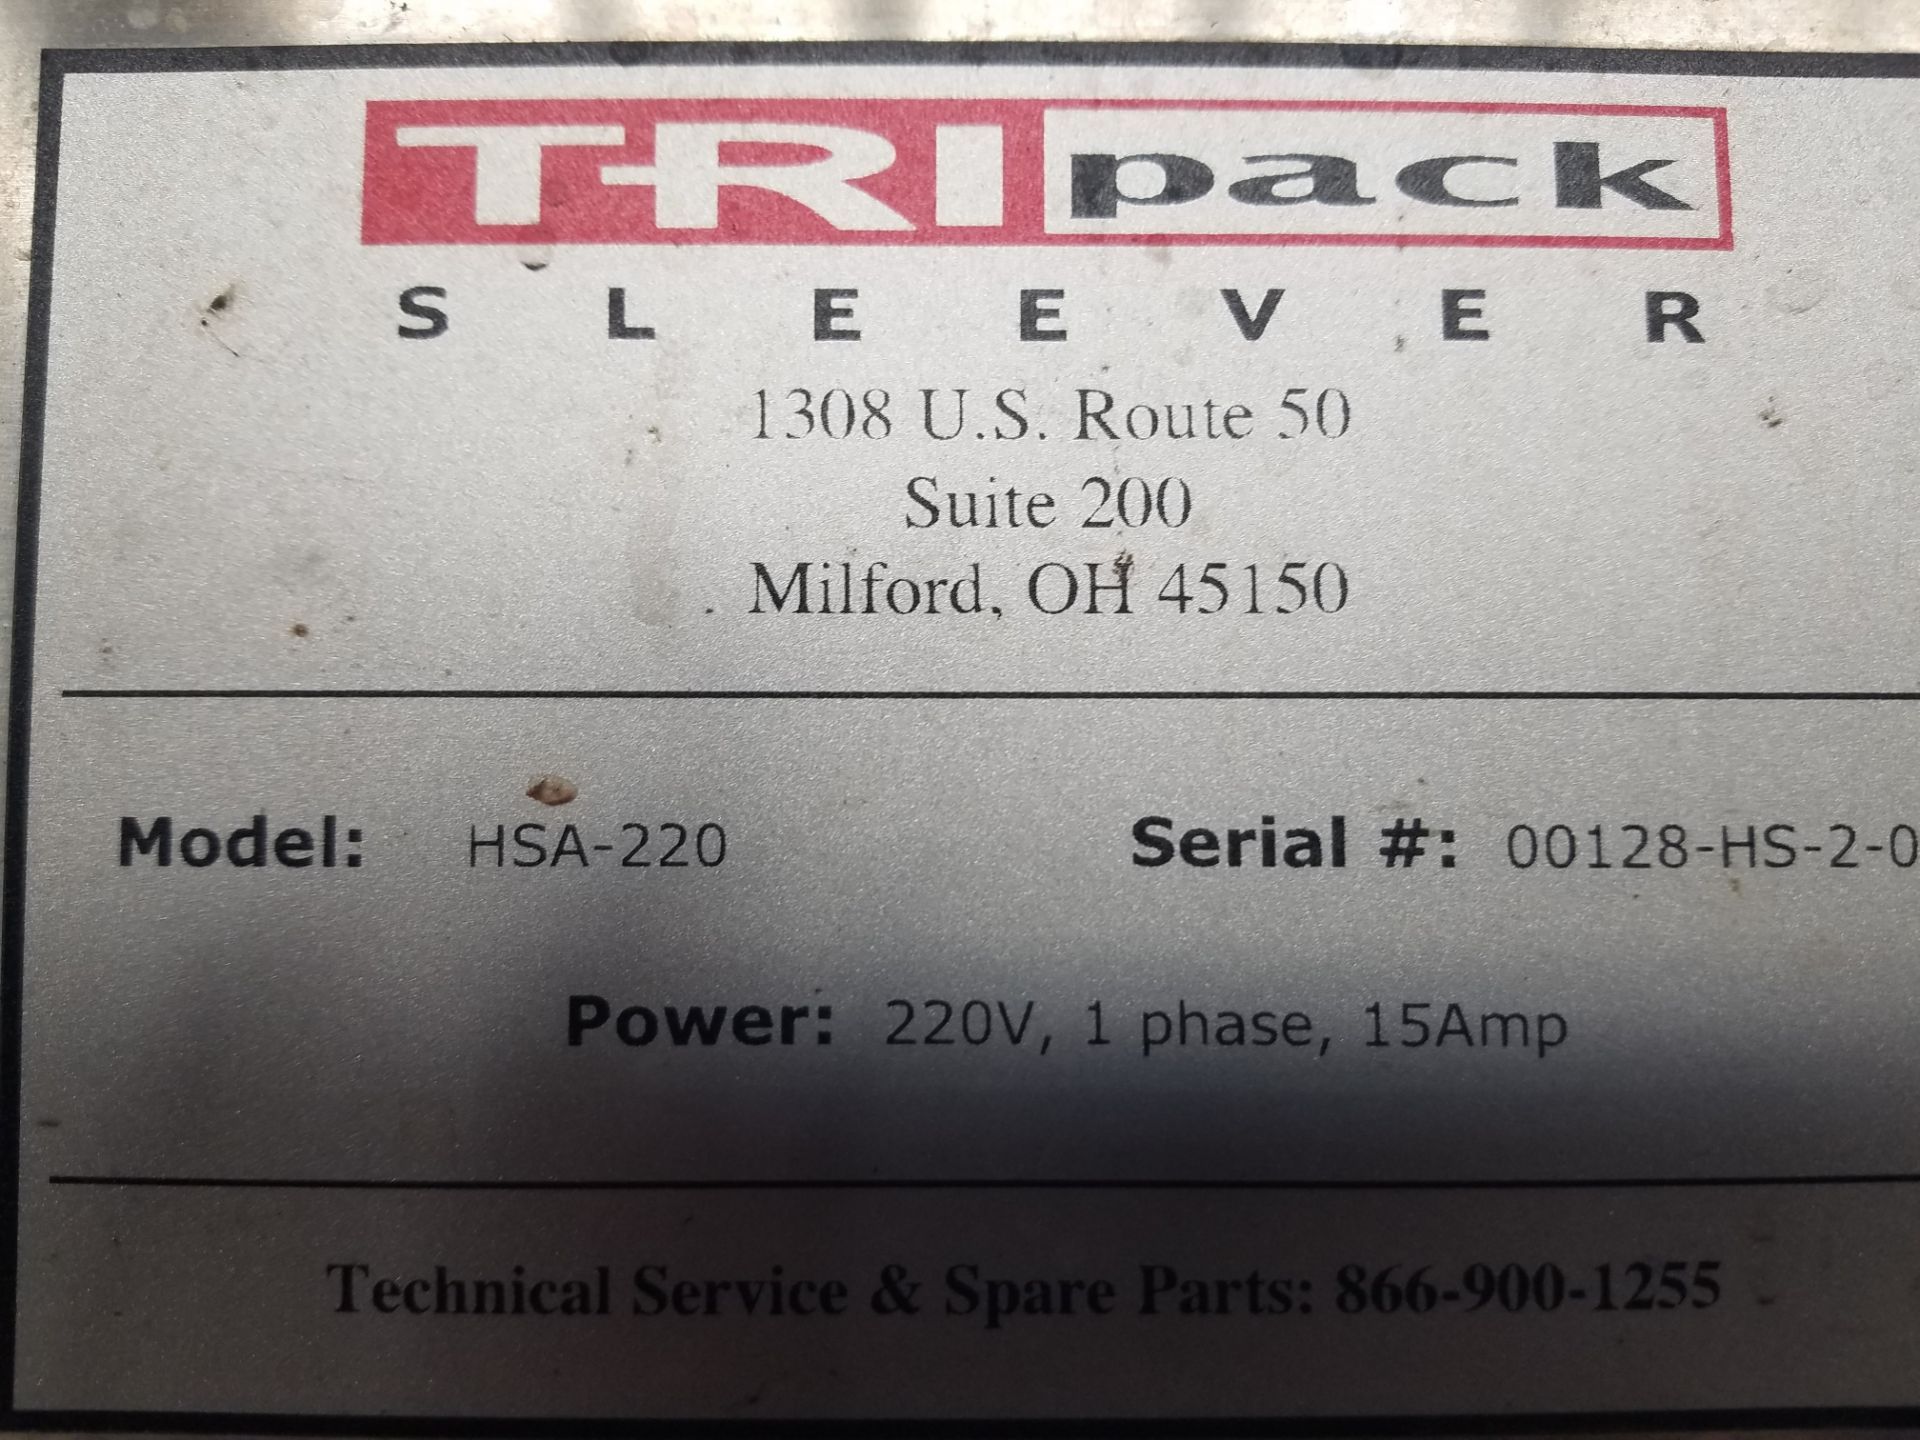 Tripack HSA-220 Sleever , Serial # 00128-HS-2-06, Volt 220, 1-Phase (Loading, Rigging & Site - Image 5 of 5